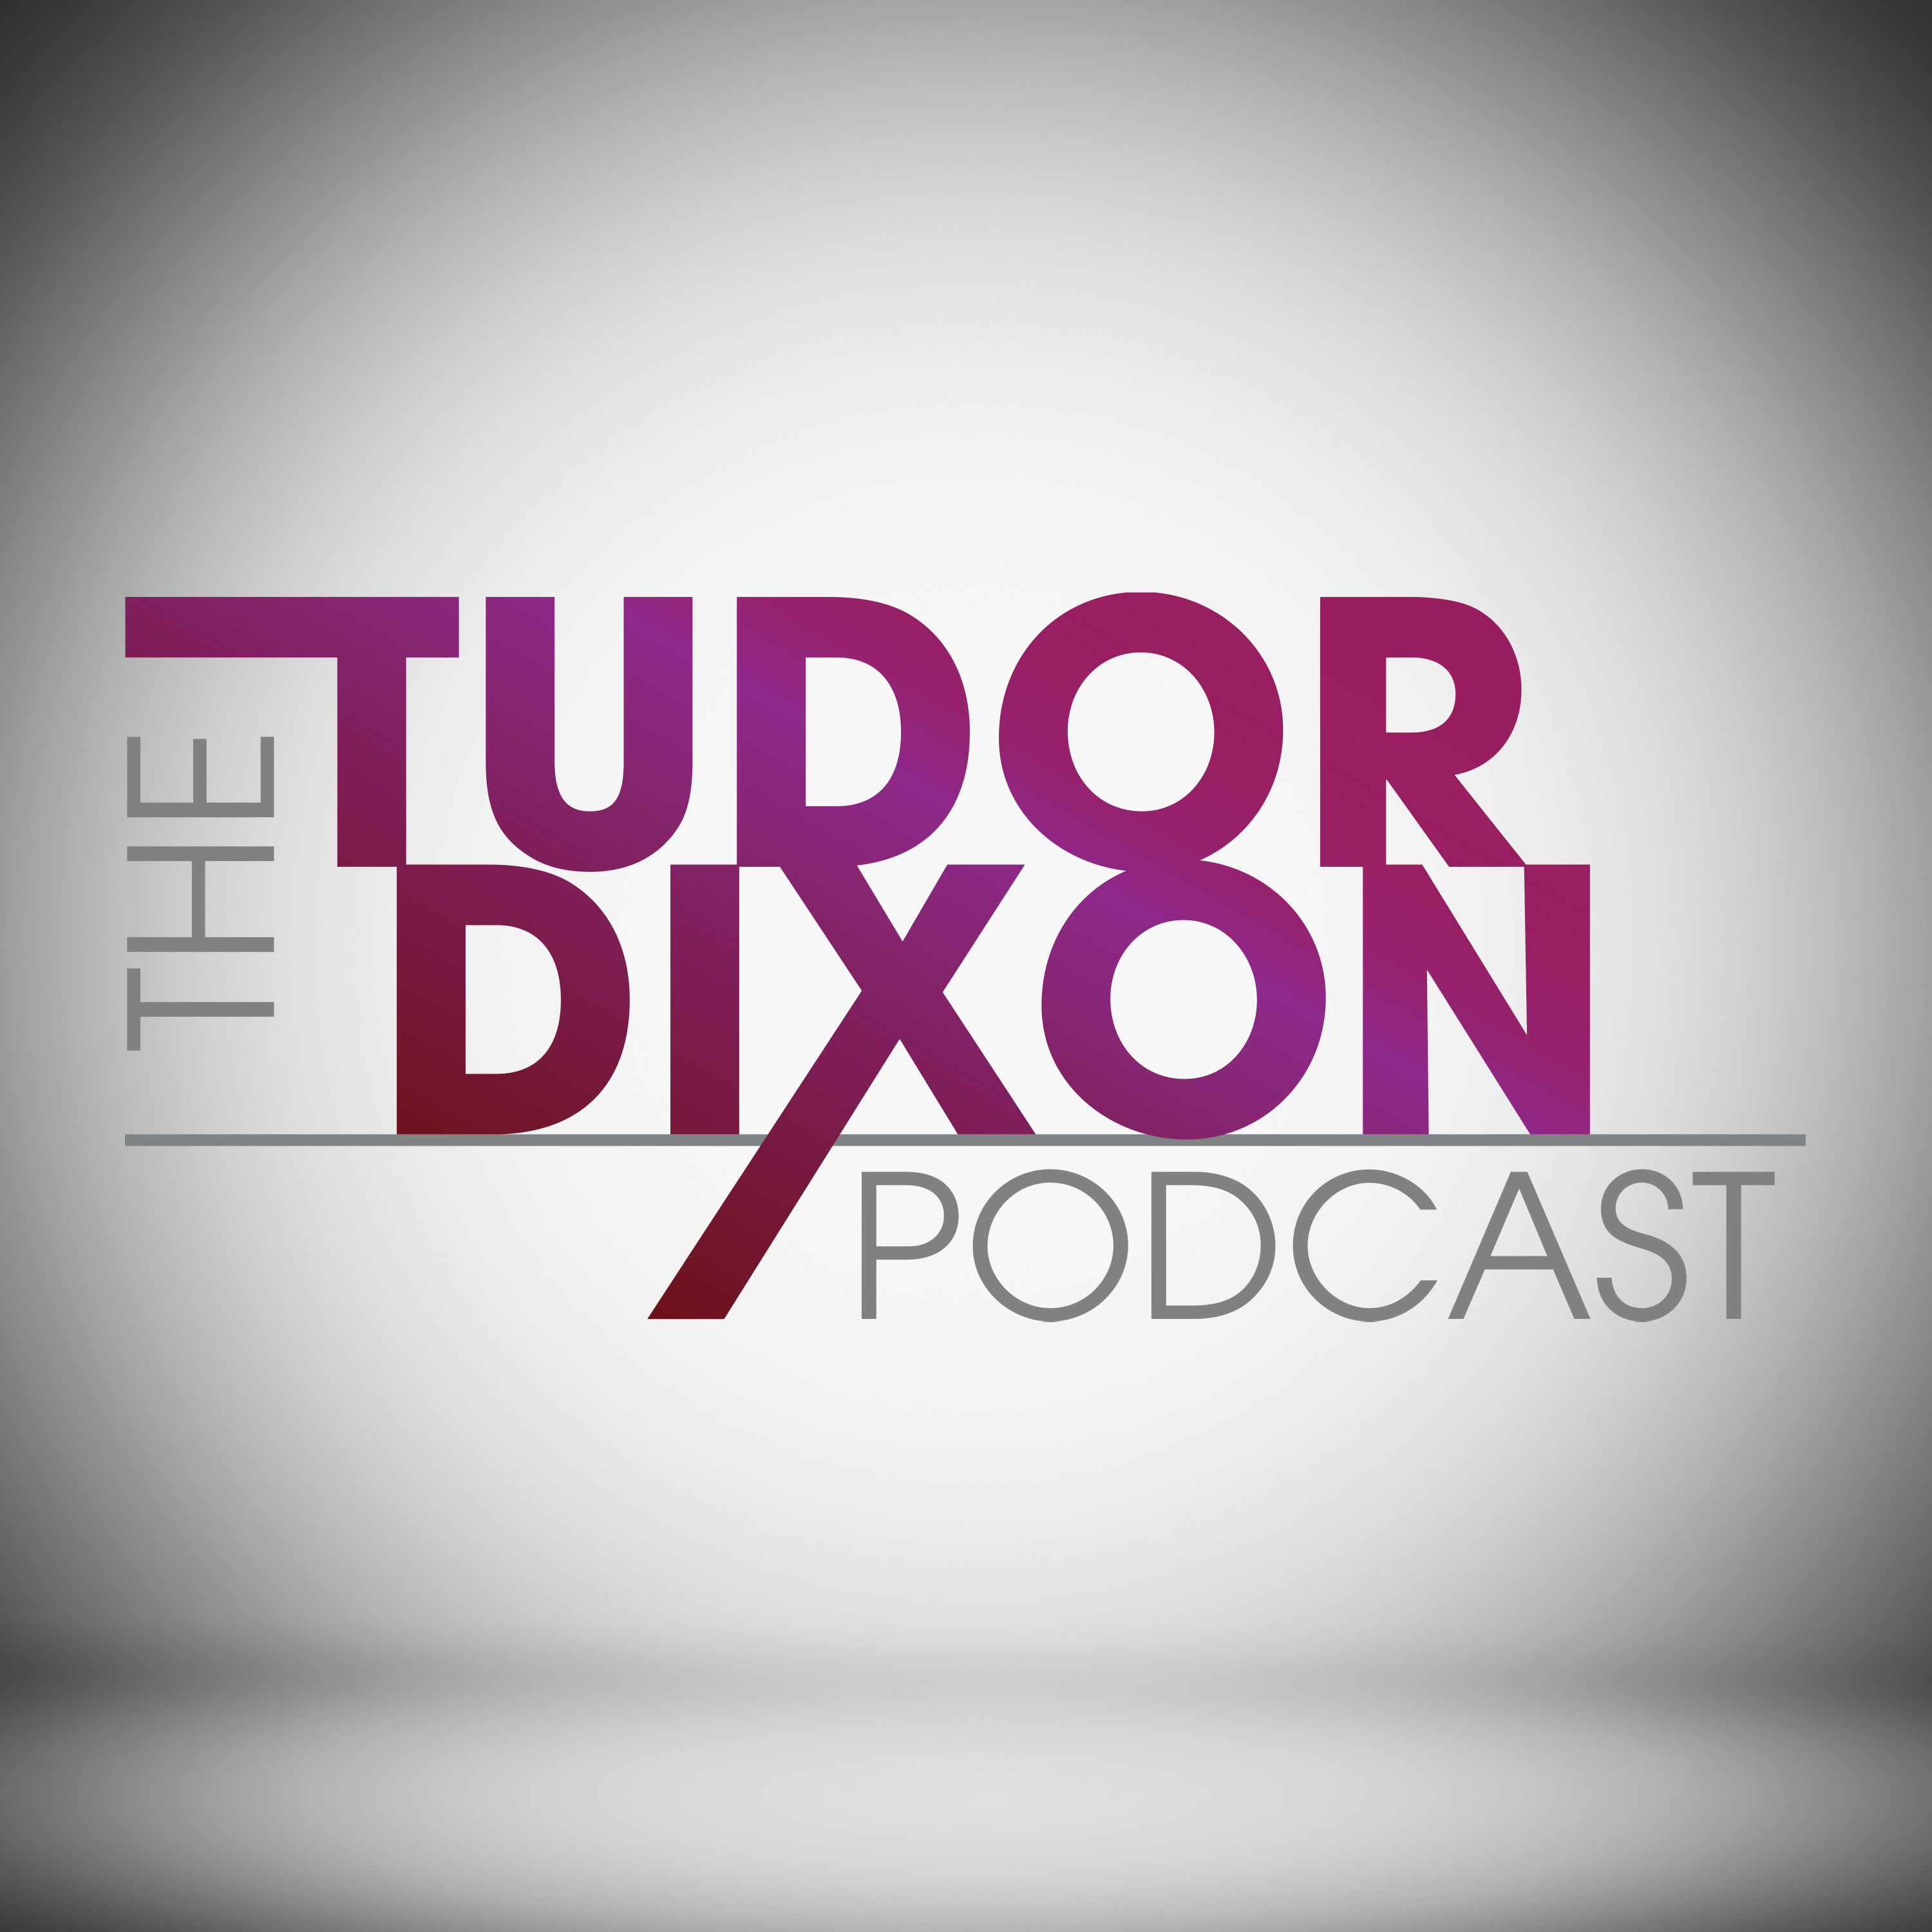 The Tudor Dixon Podcast: Sticks and Stones and Name Calling Hurts?